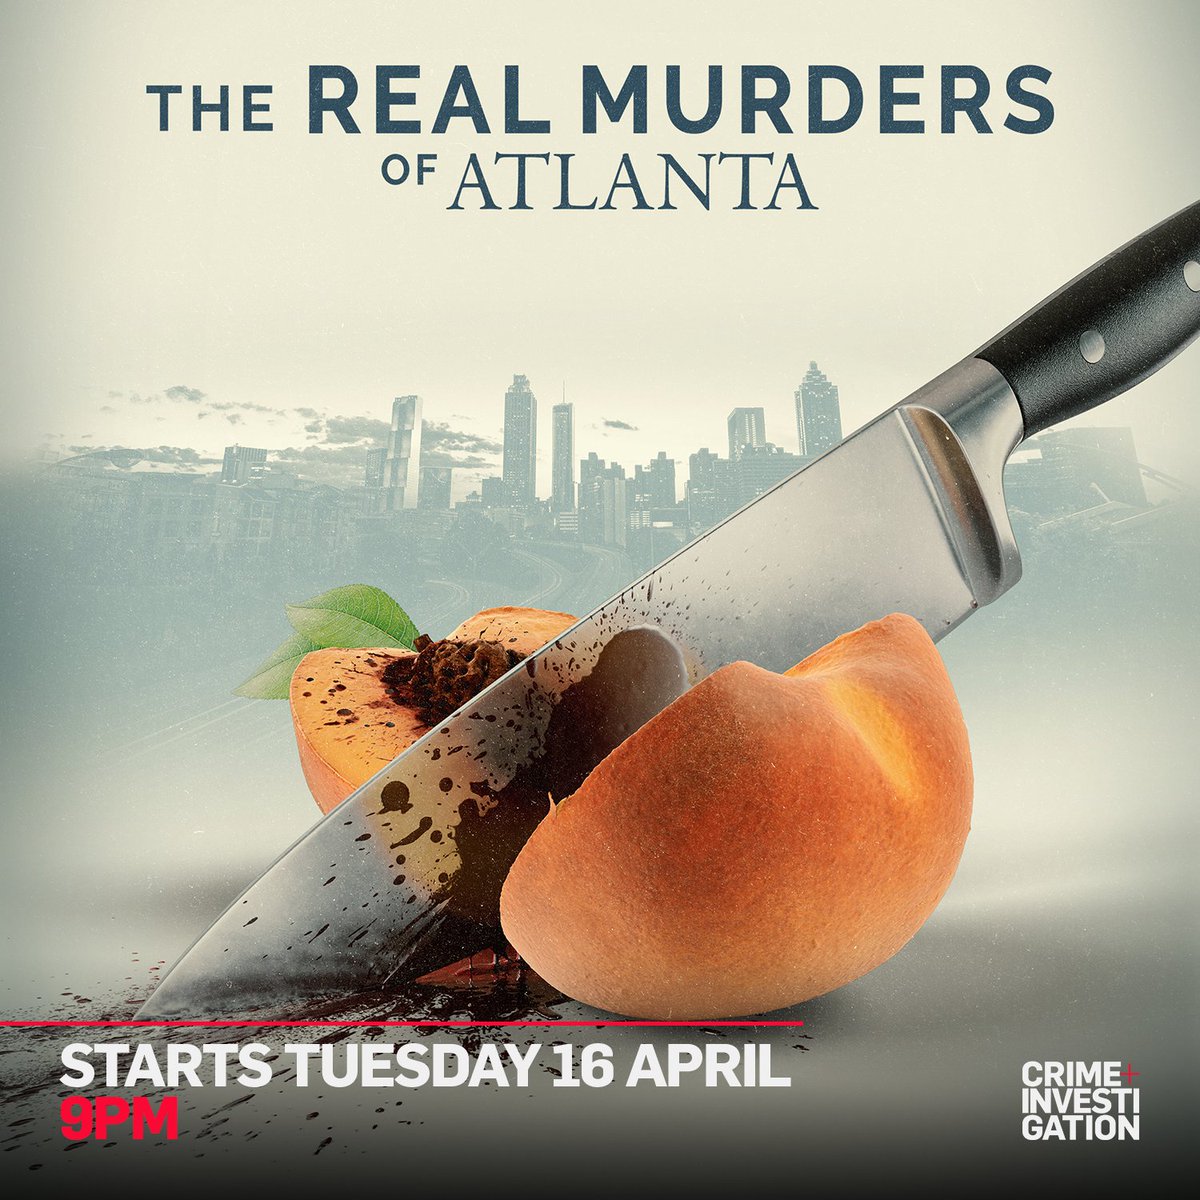 Shocking, sinful and salacious tales of homicide served up from the state of Georgia. The #RealMurdersOfAtlanta 🍑🗡️ Season 3 arrives next week! 📺 Starts Tuesday 16 April 9pm